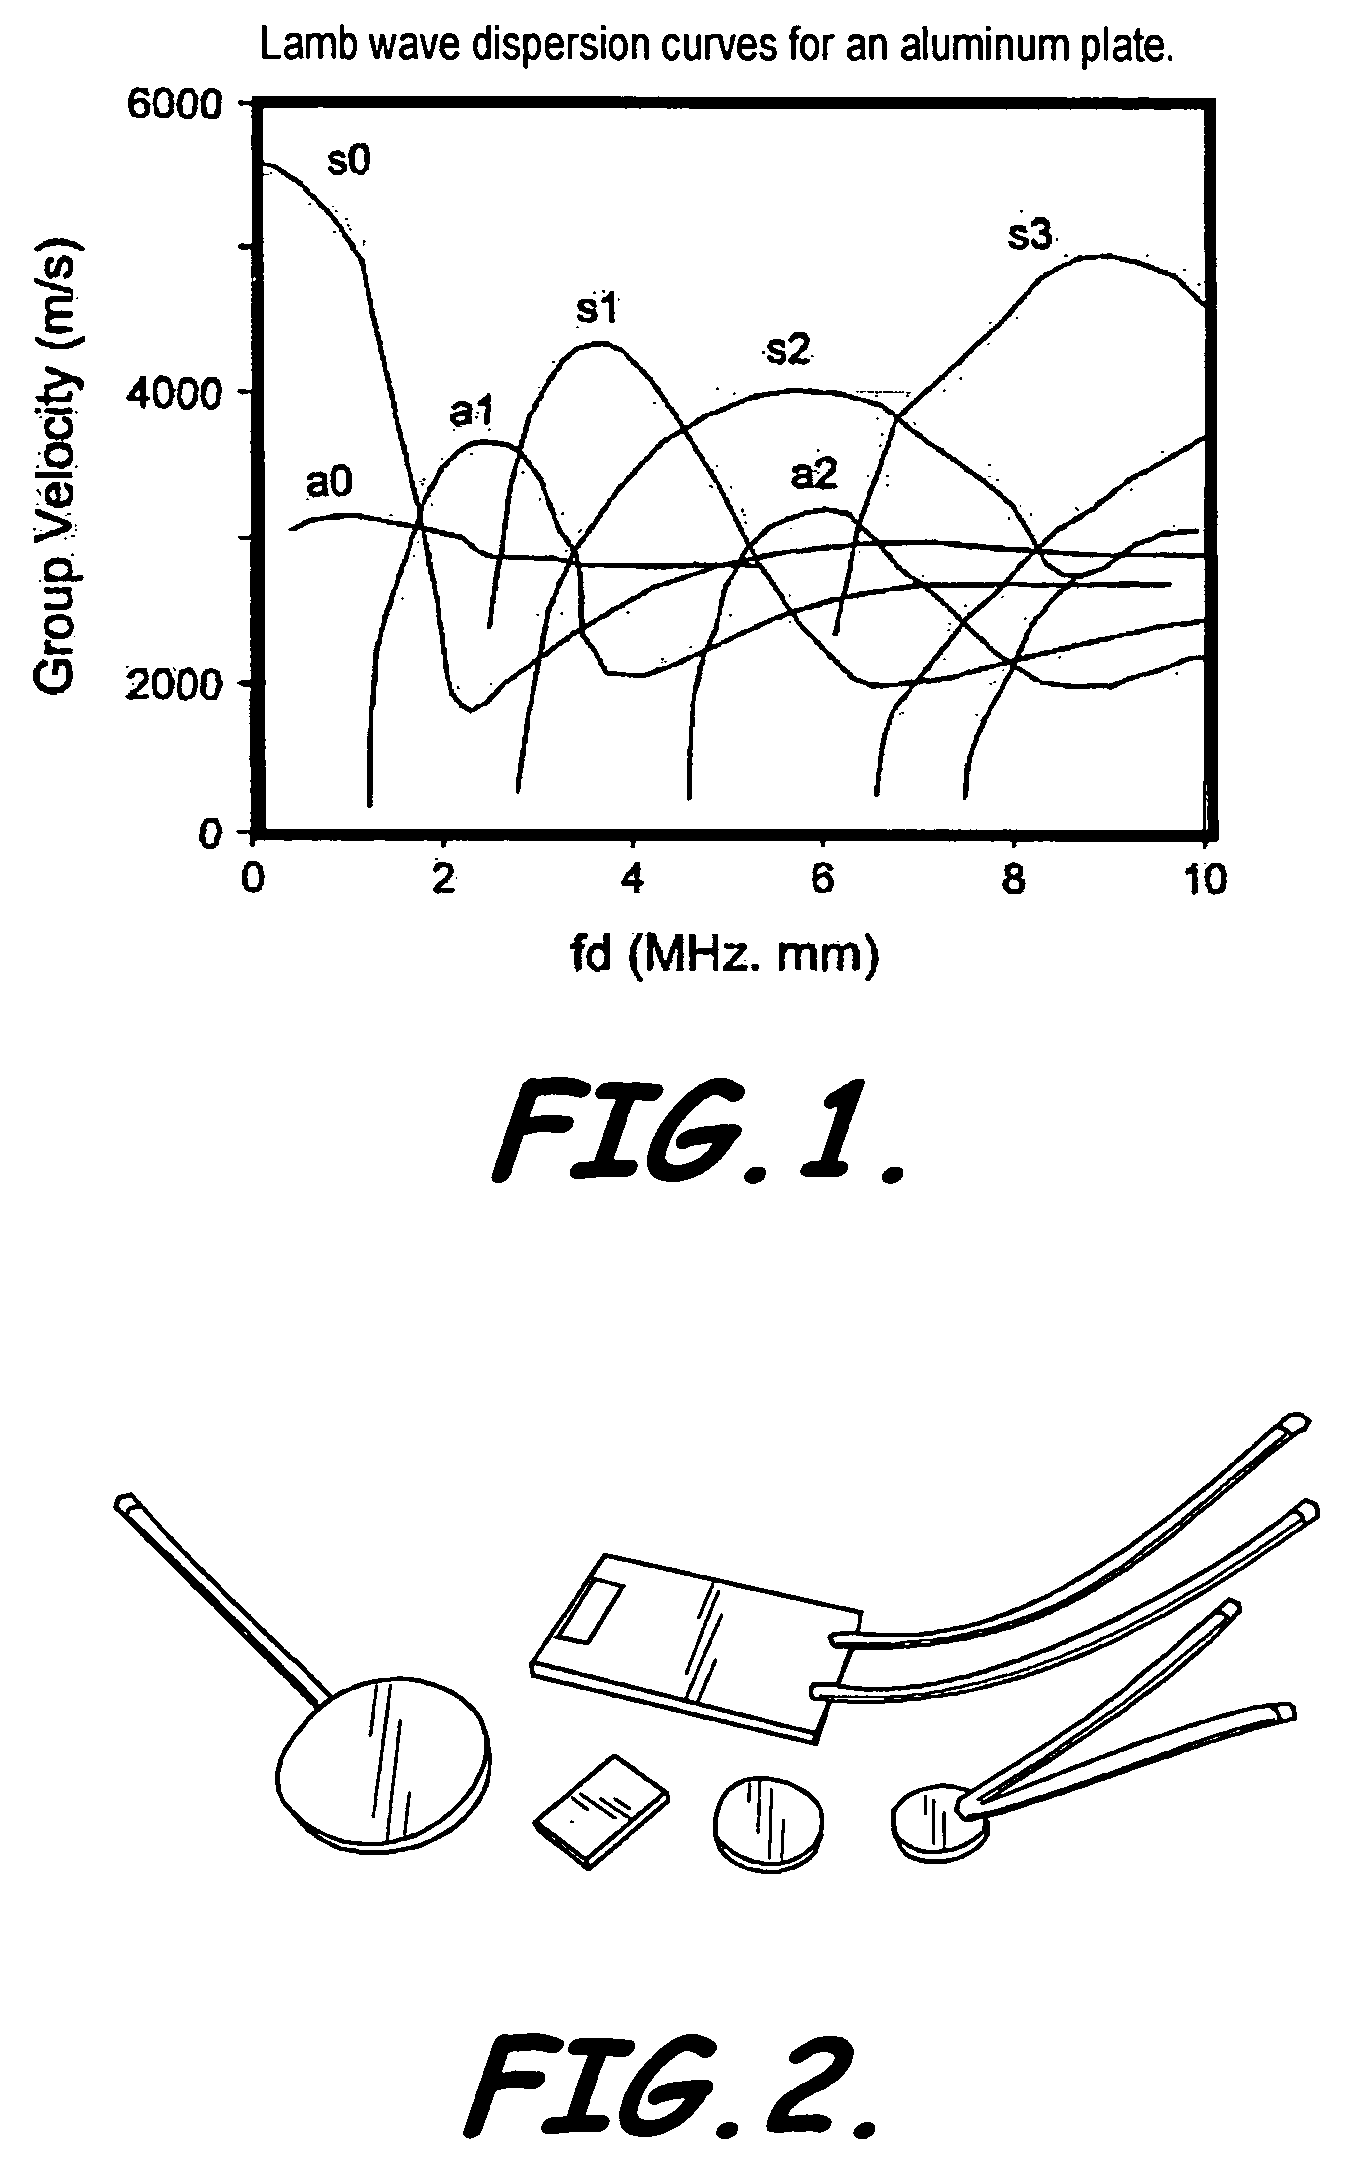 Ultrasound communication system for metal structure and related methods